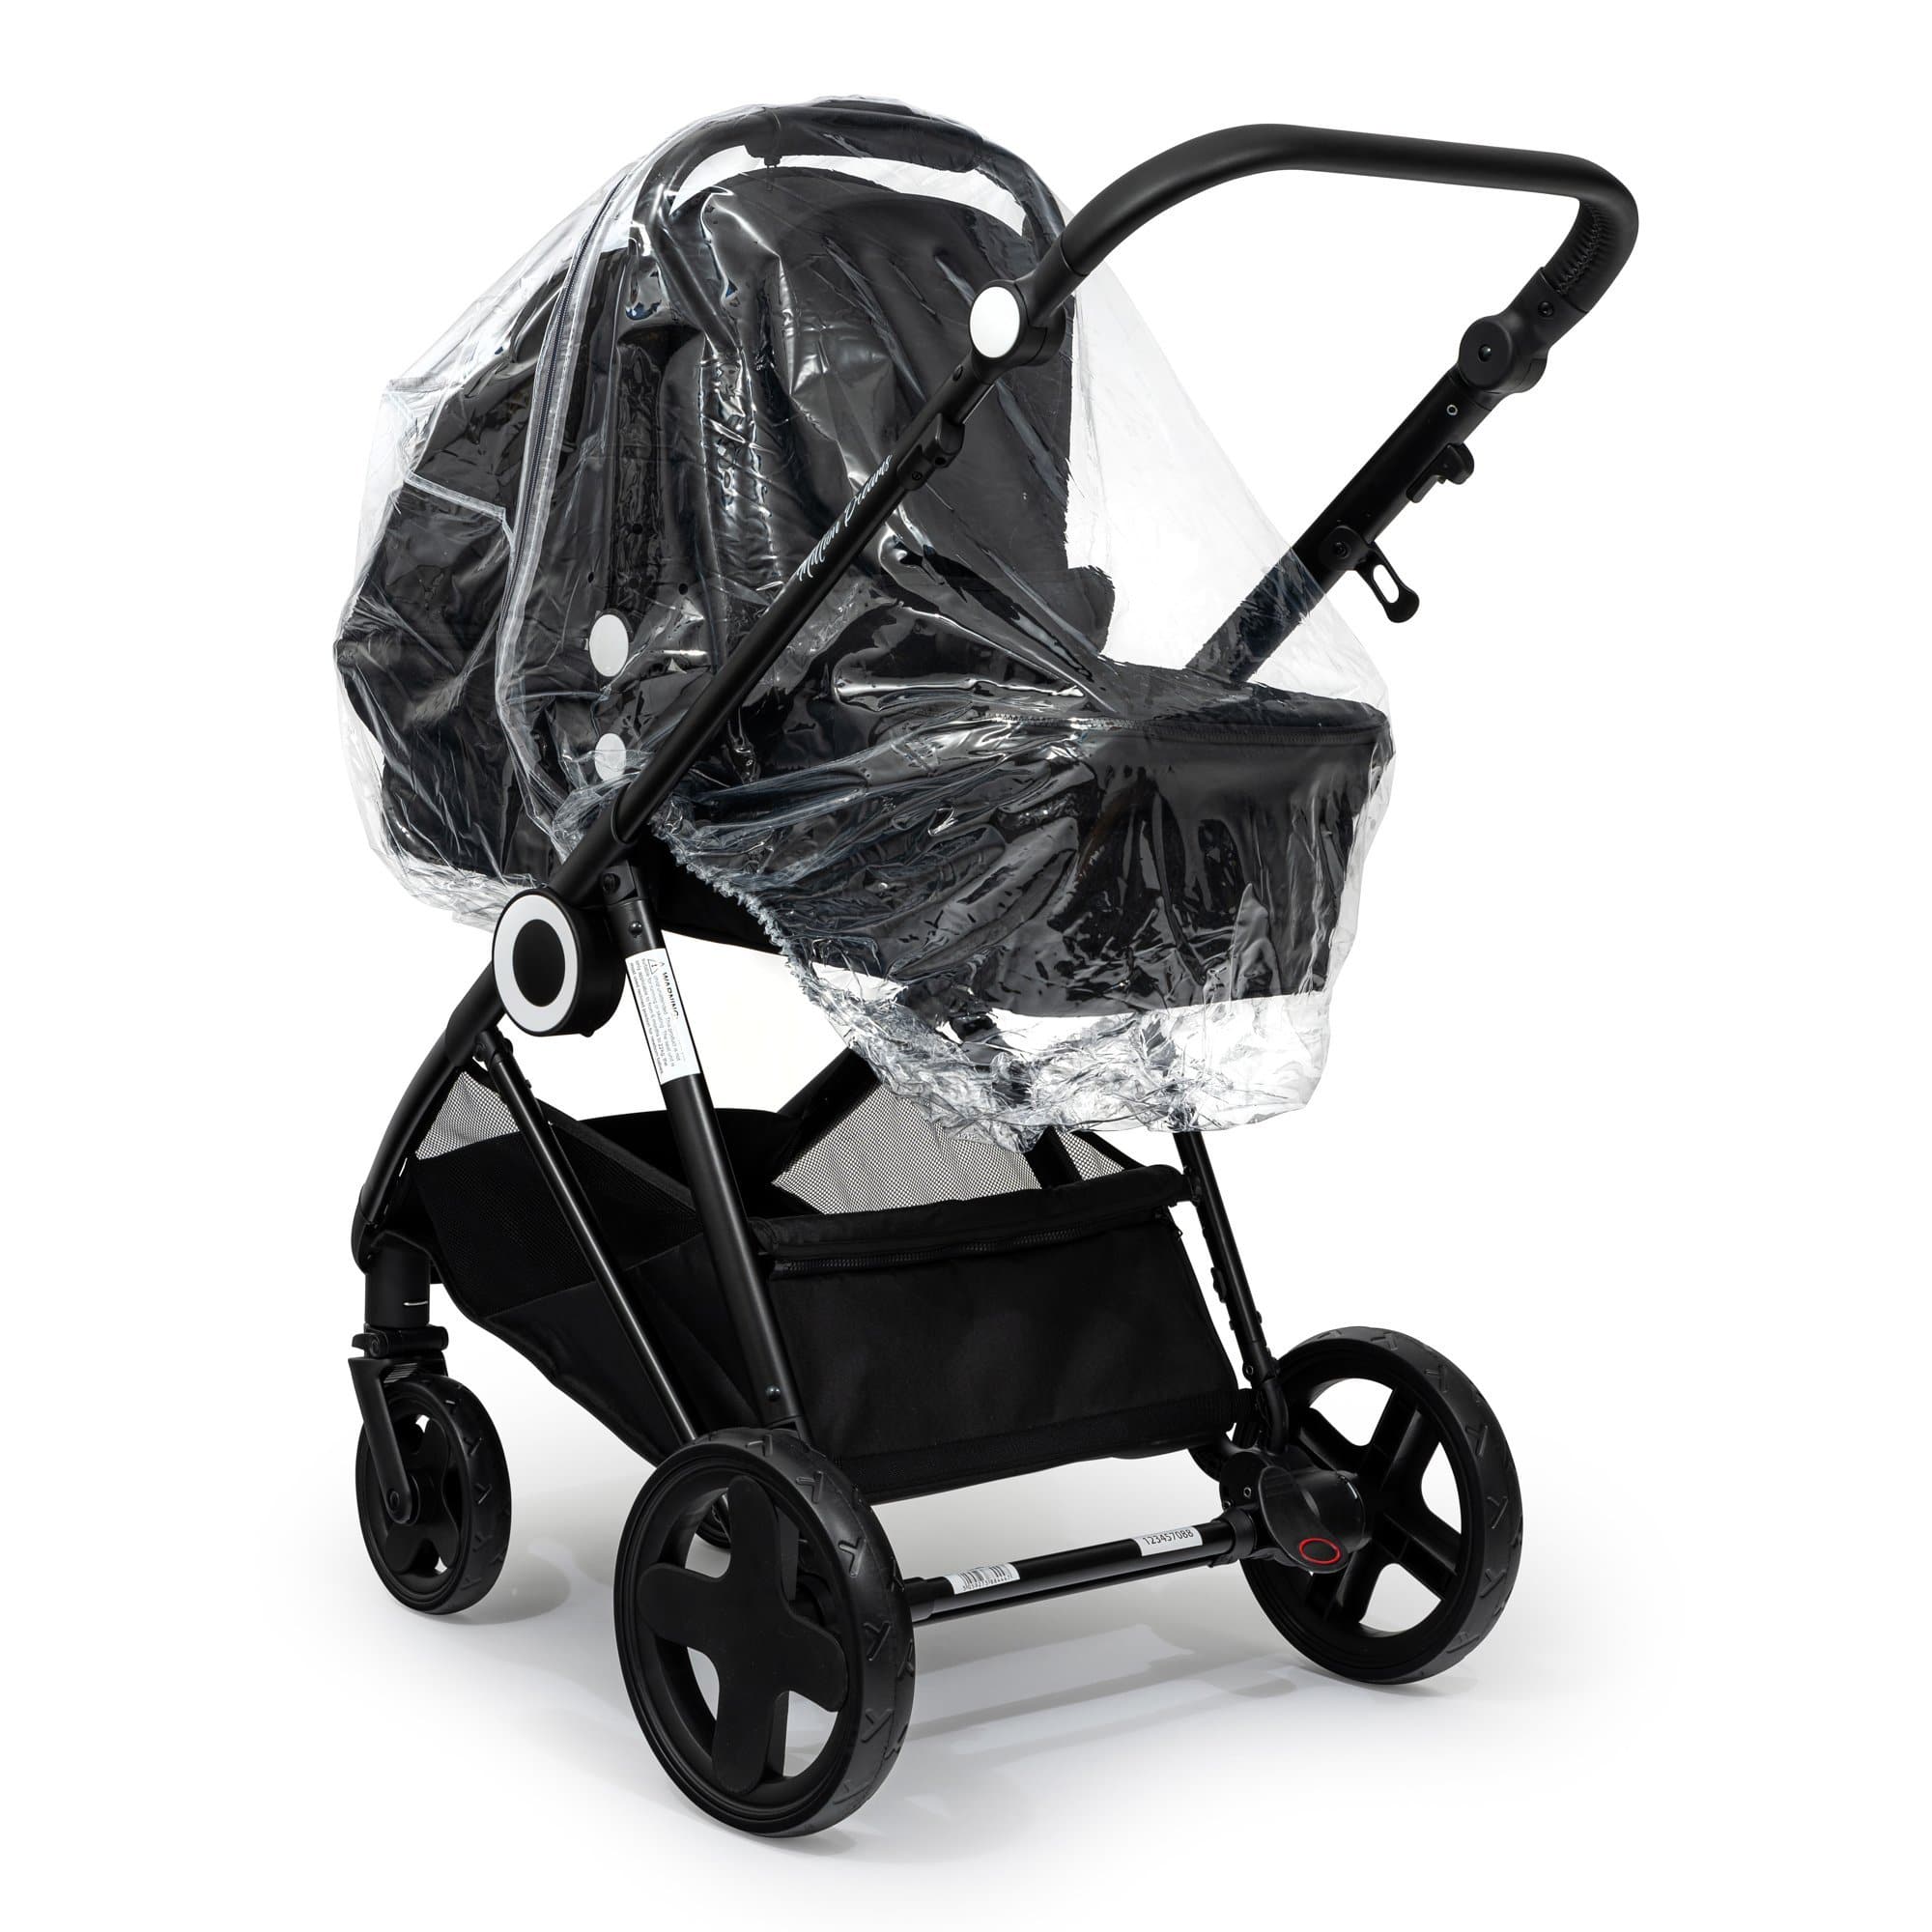 2 in 1 Rain Cover Compatible with Uppababy - Fits All Models   